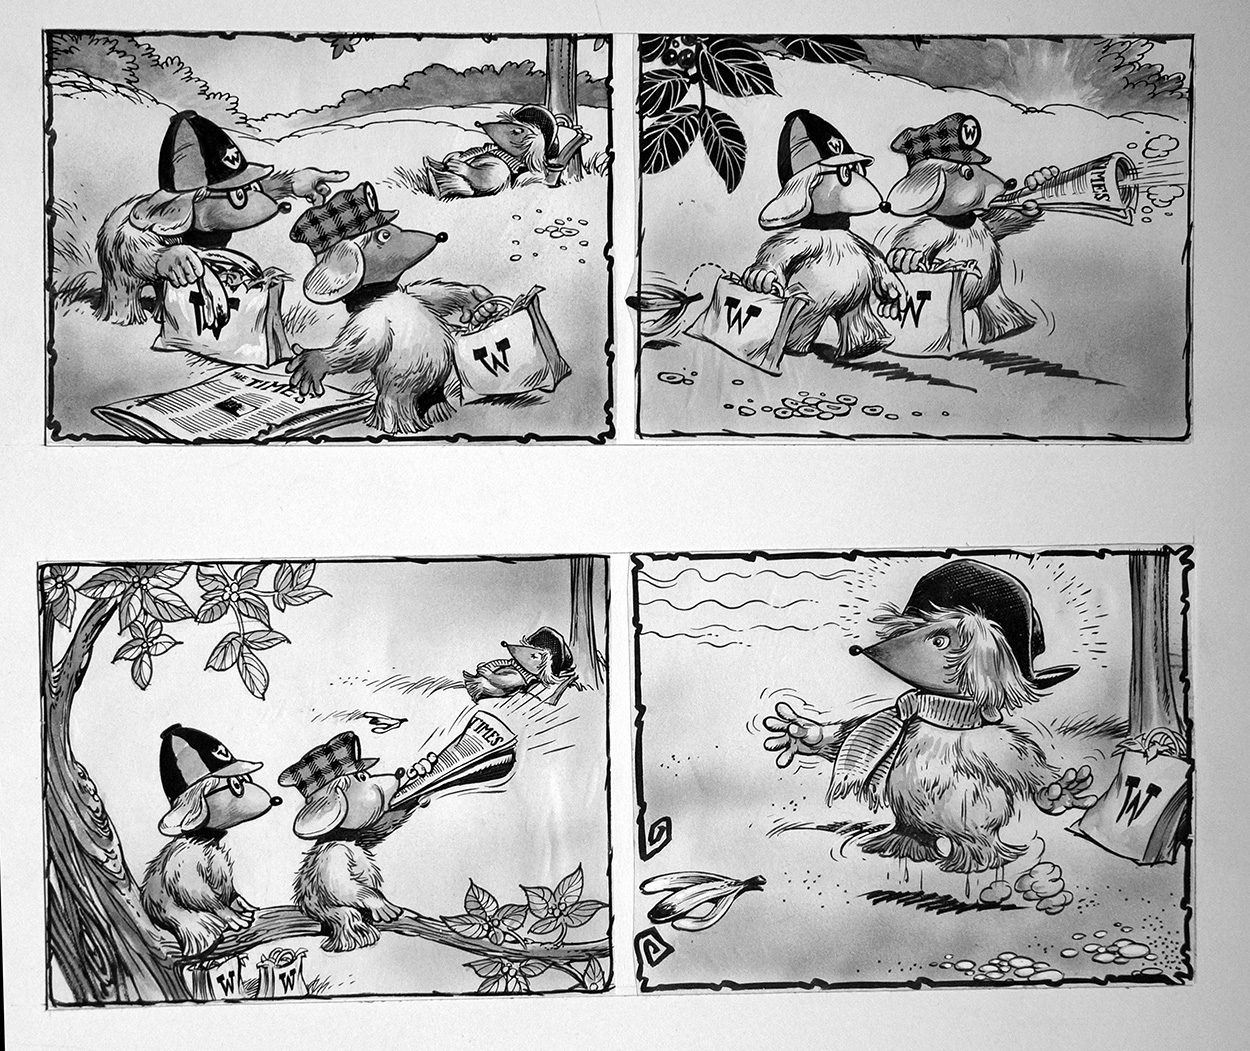 The Wombles: Wake Up Call (TWO pages) (Originals) art by The Wombles (Blasco) Art at The Illustration Art Gallery